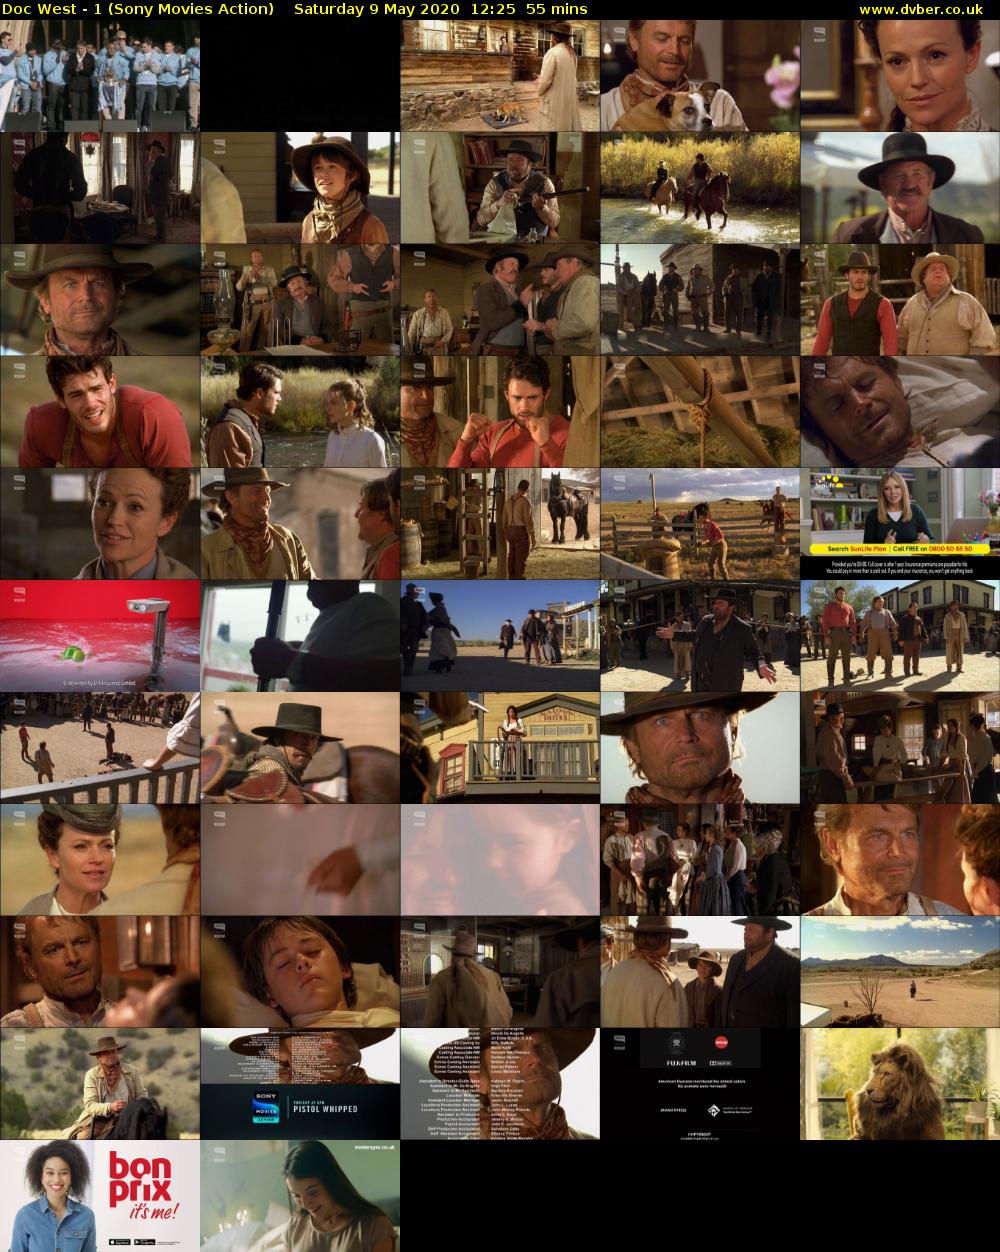 Doc West - 1 (Sony Movies Action) Saturday 9 May 2020 12:25 - 13:20